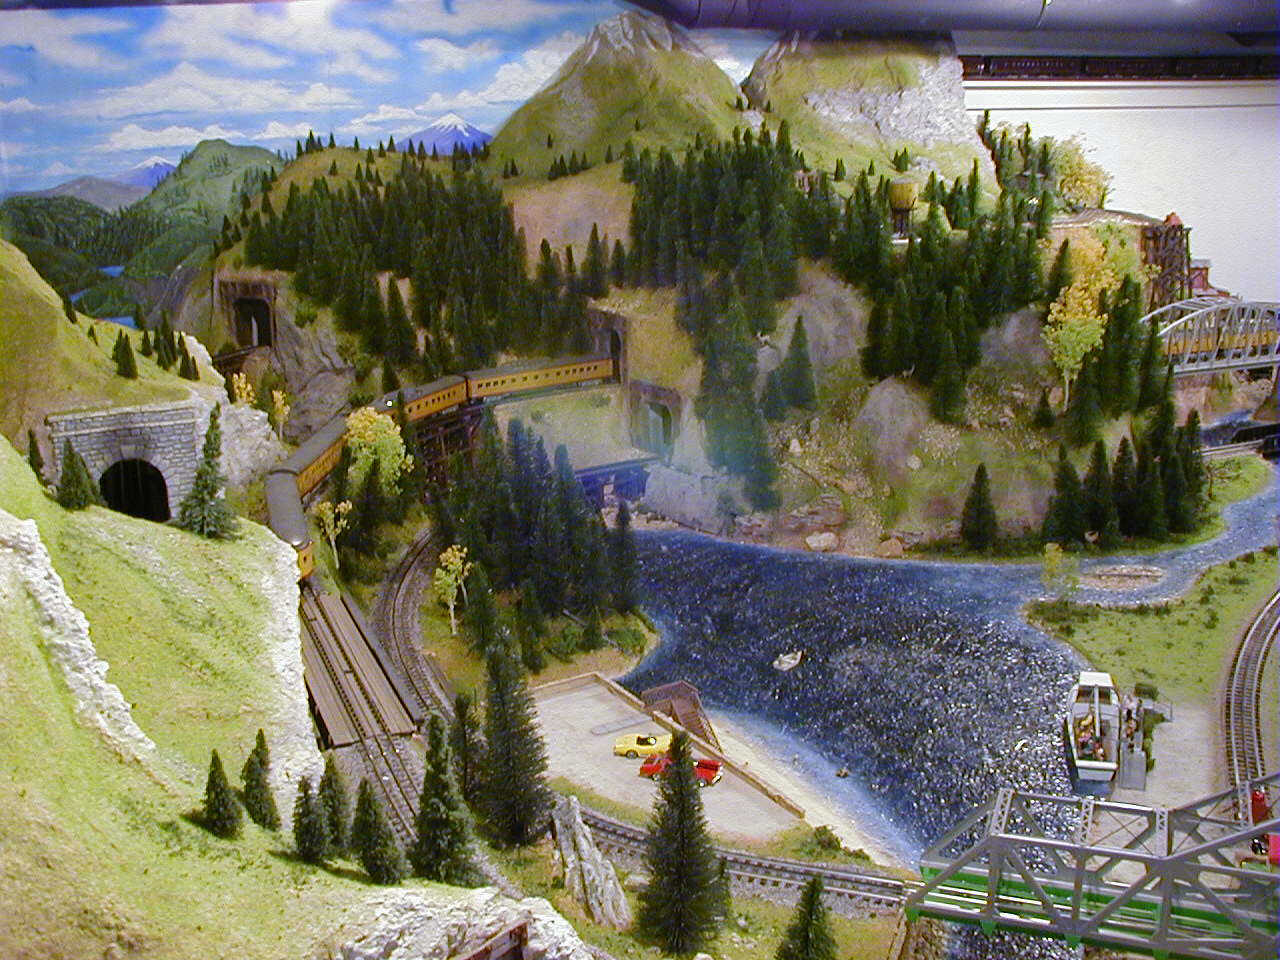  and they are giving wonderful look to this model train layout